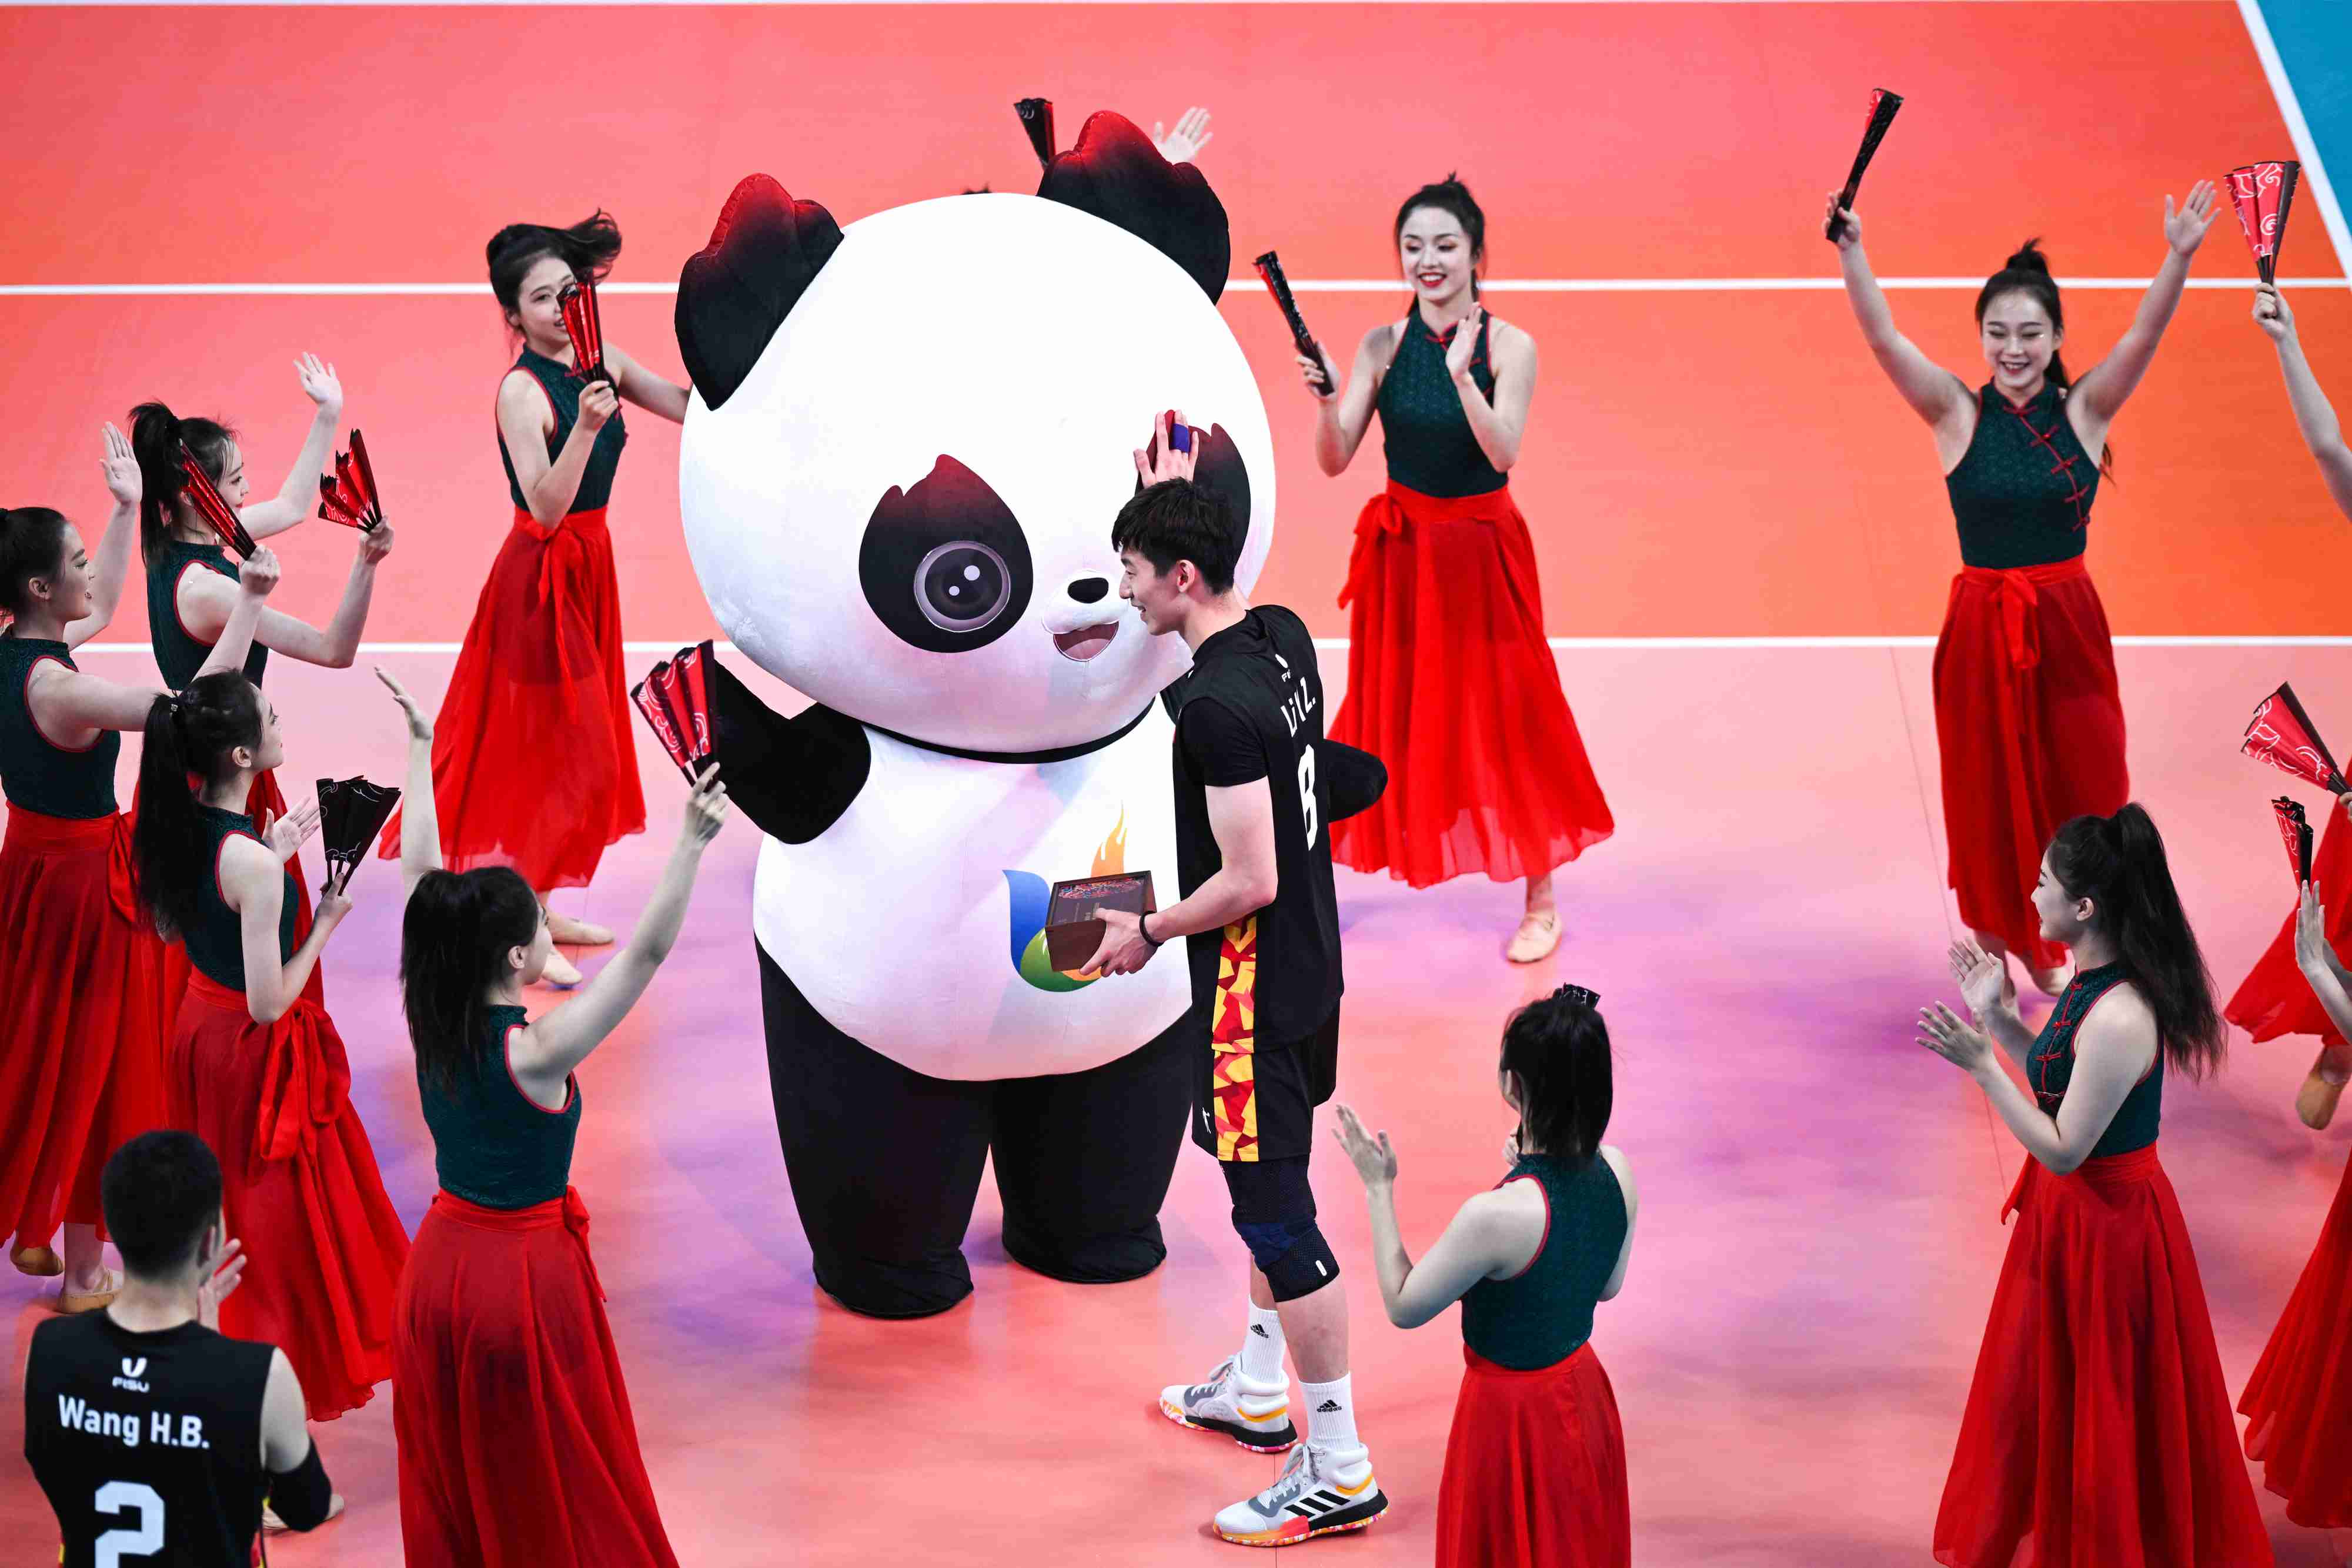 Chasing Light | The Most Beautiful Youth in the Present and Future Universiade | Chengdu | Youth in the Present